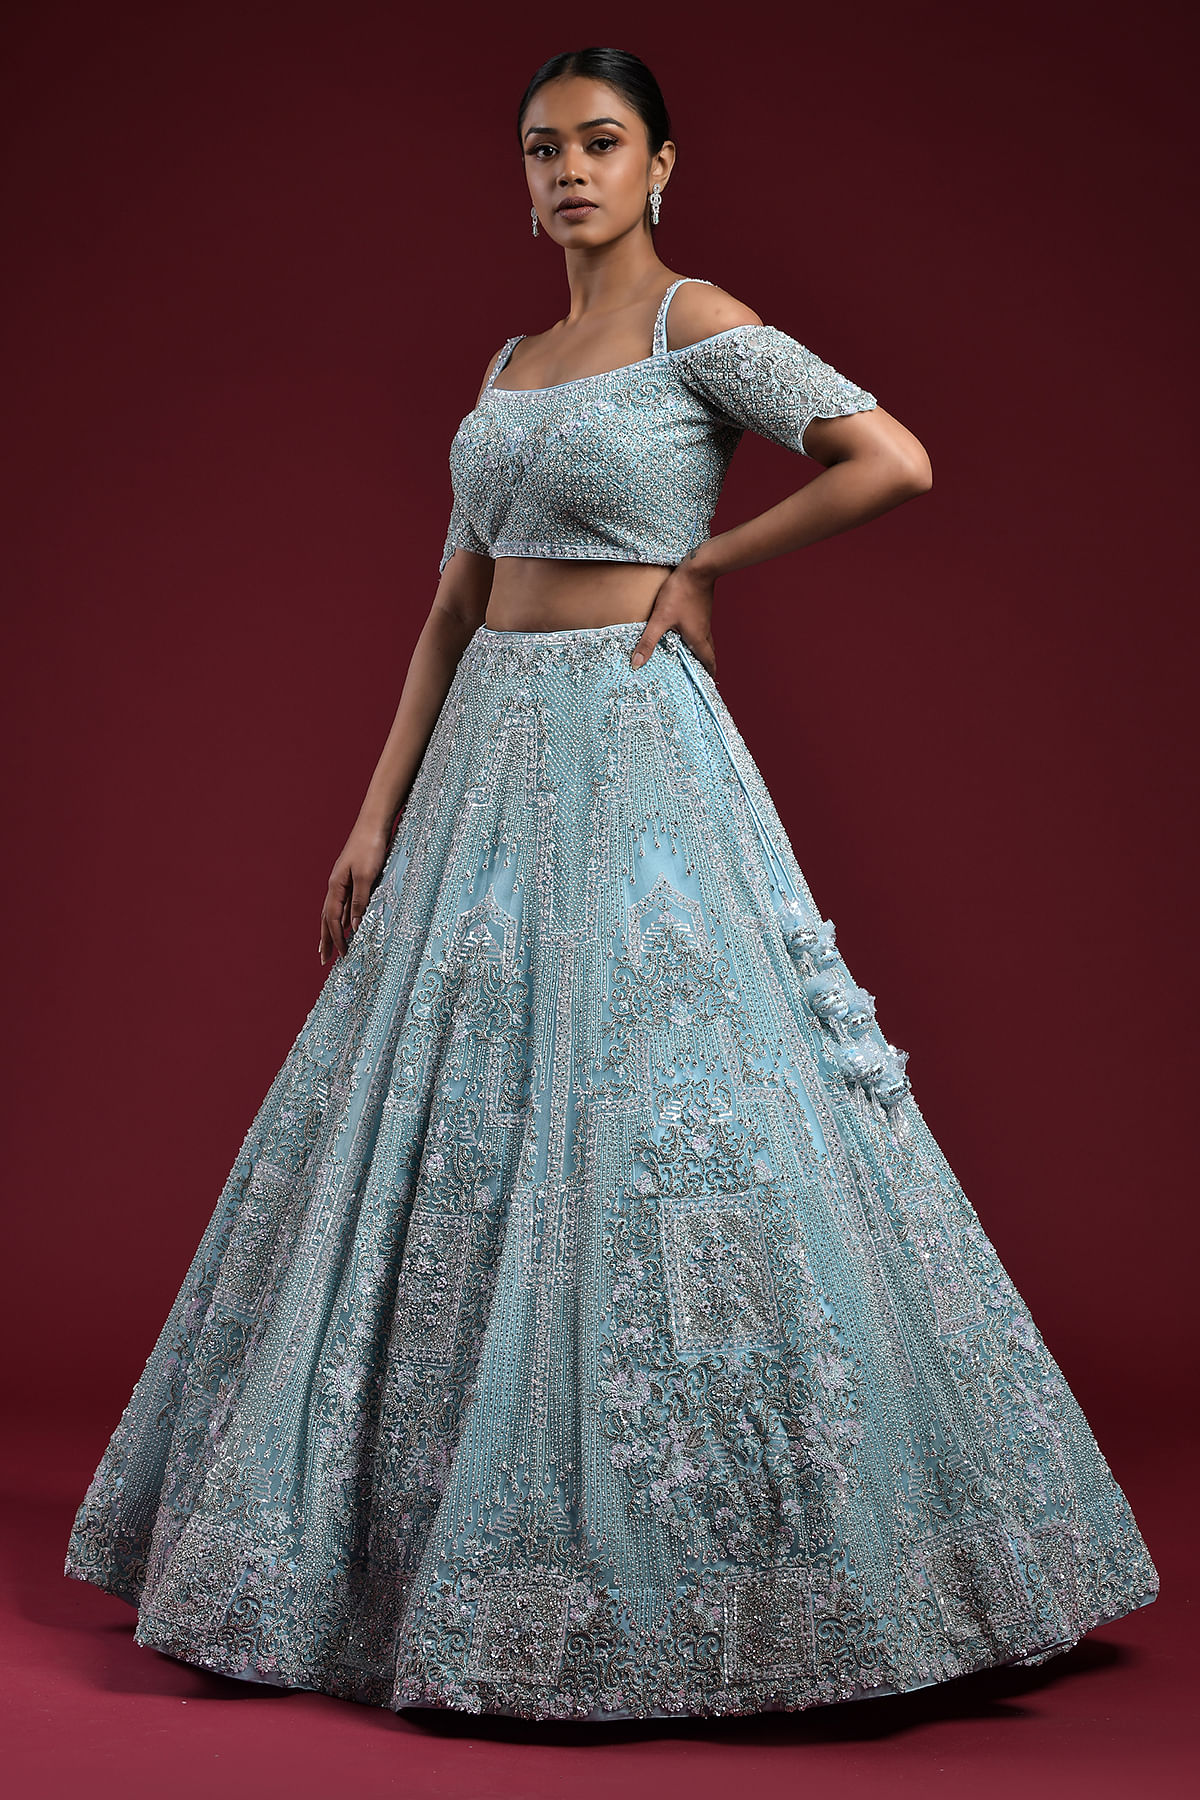 Trending: Bridal Lehengas With a Dash Of Cupcake Hues | New lehenga, Indian  wedding wear, Indian bridal outfits